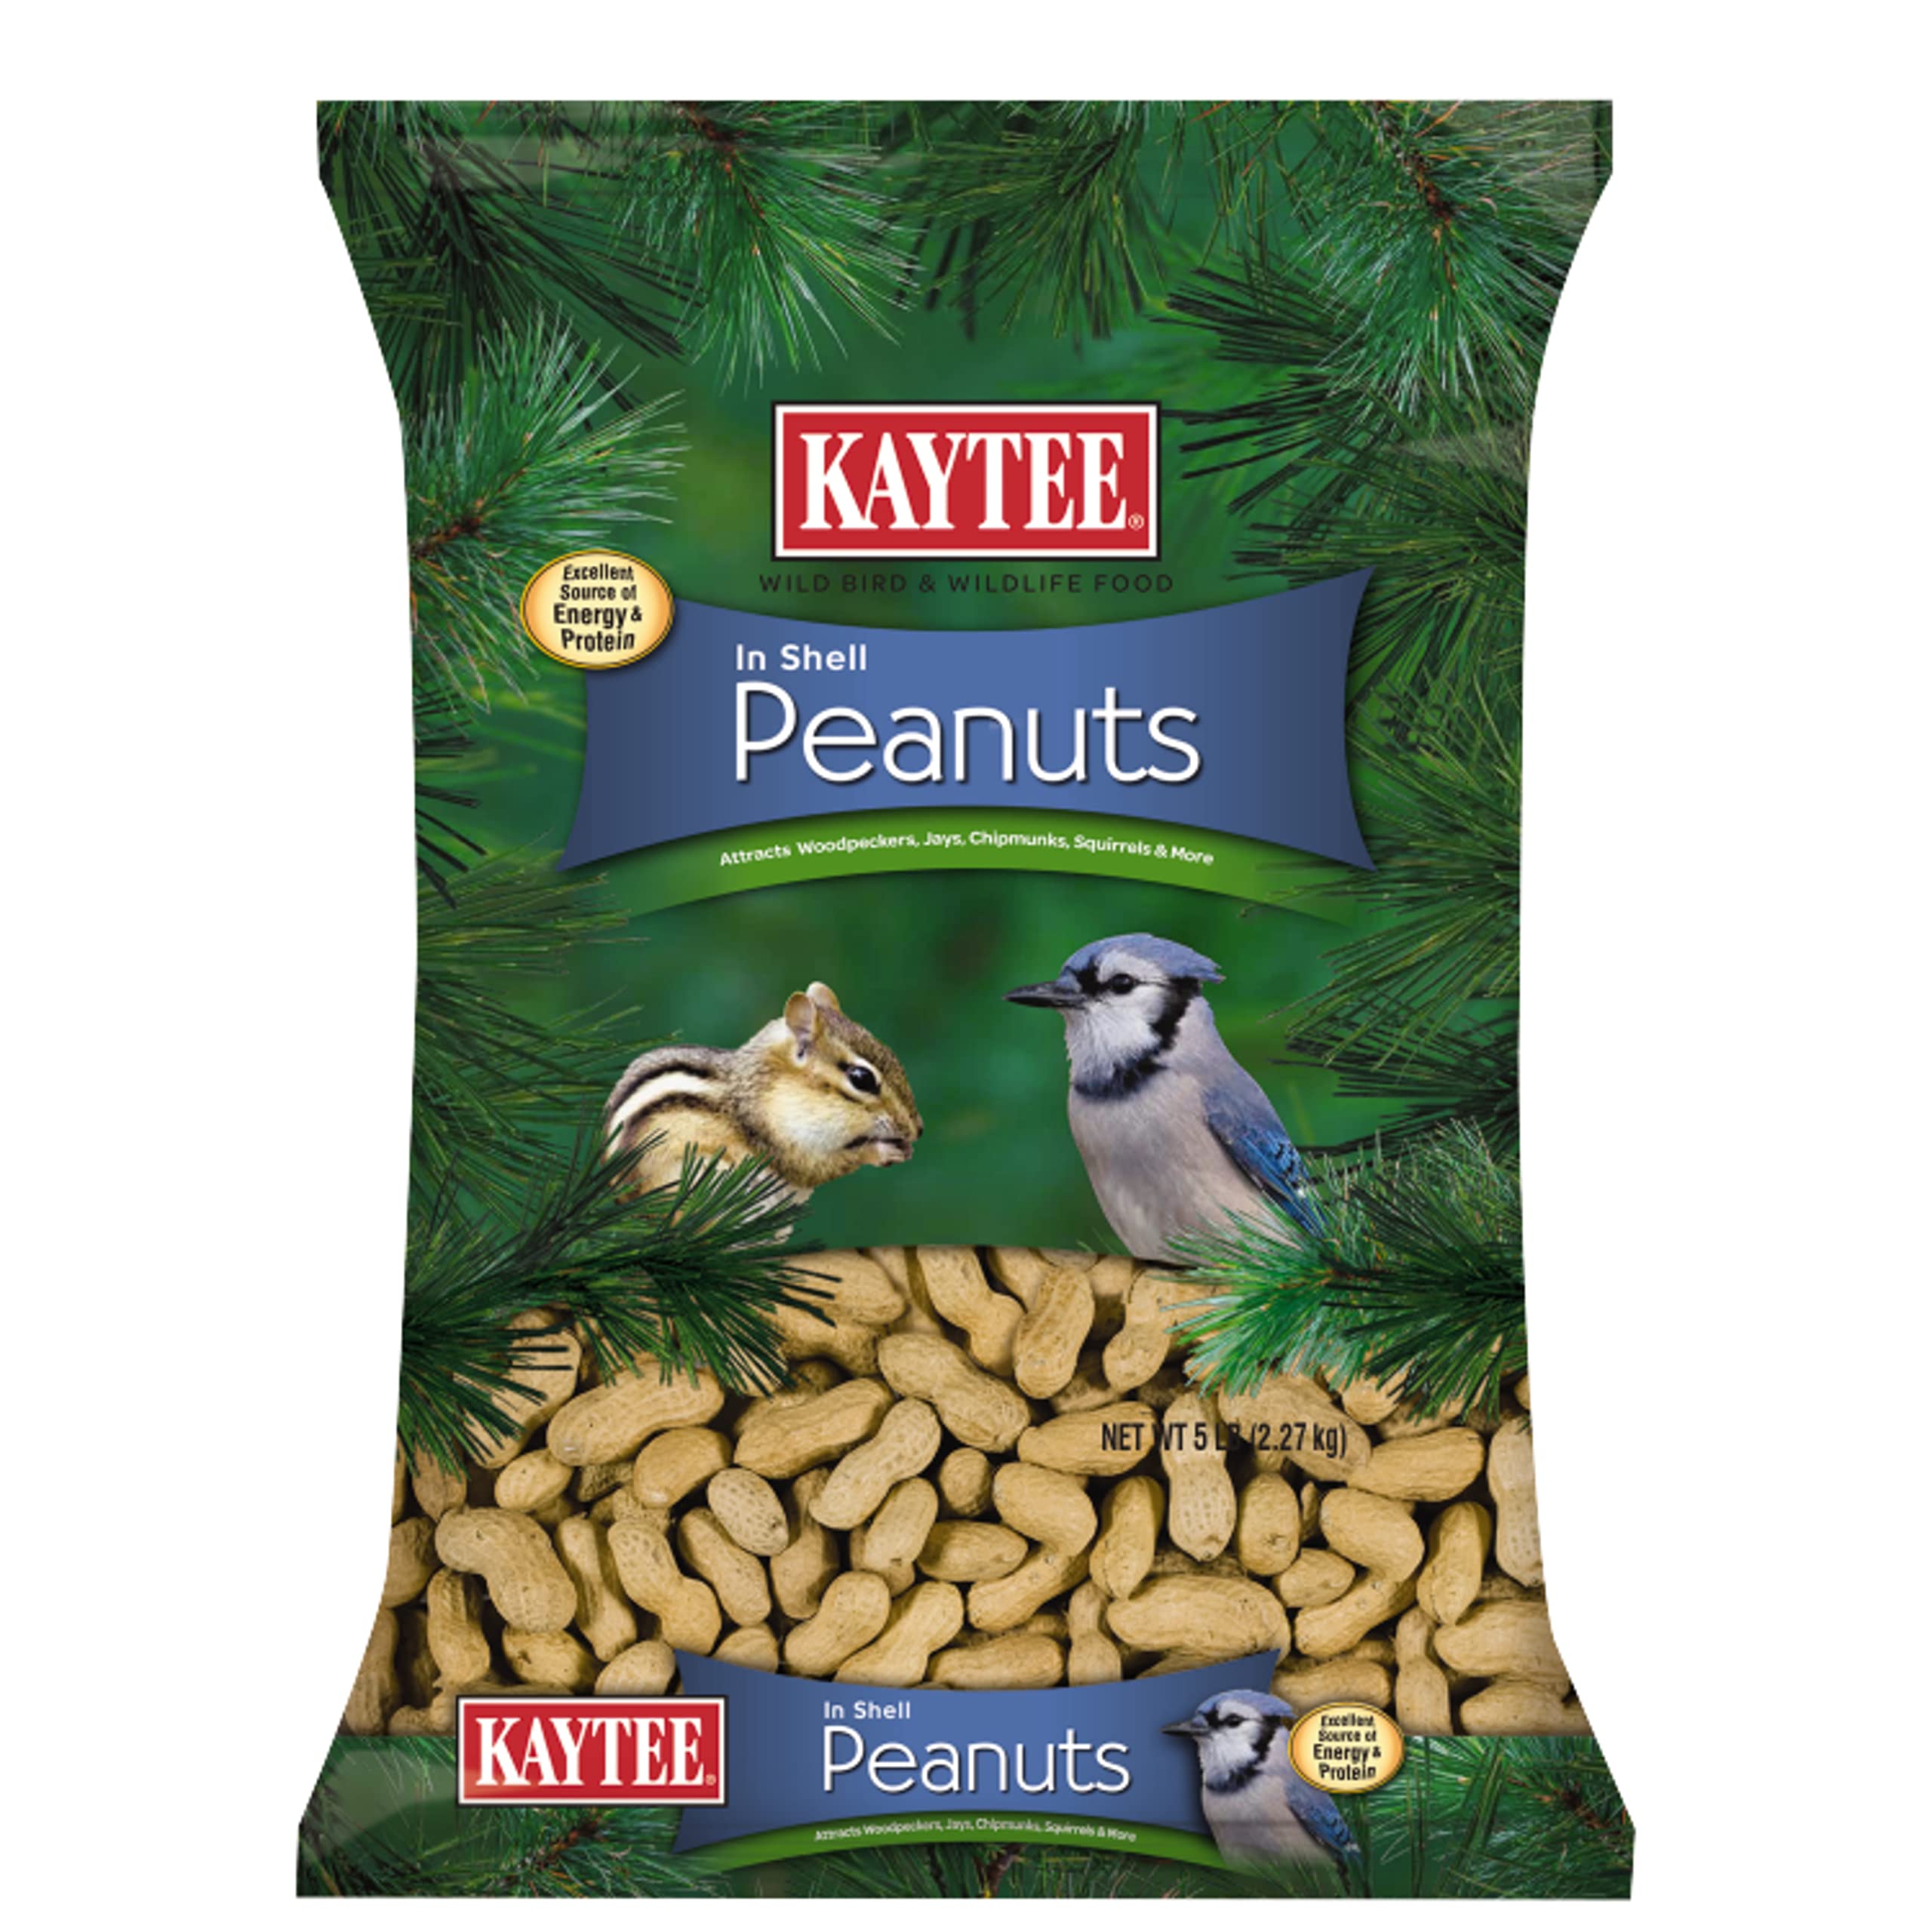 5-Lb Kaytee Peanuts in Shell for Squirrels, Woodpeckers, Nuthatches, Jays, Towhees, Cardinals, Indigo Buntings, and Other Wild Birds $8.79 + Free Shipping w/ Prime or on $35+